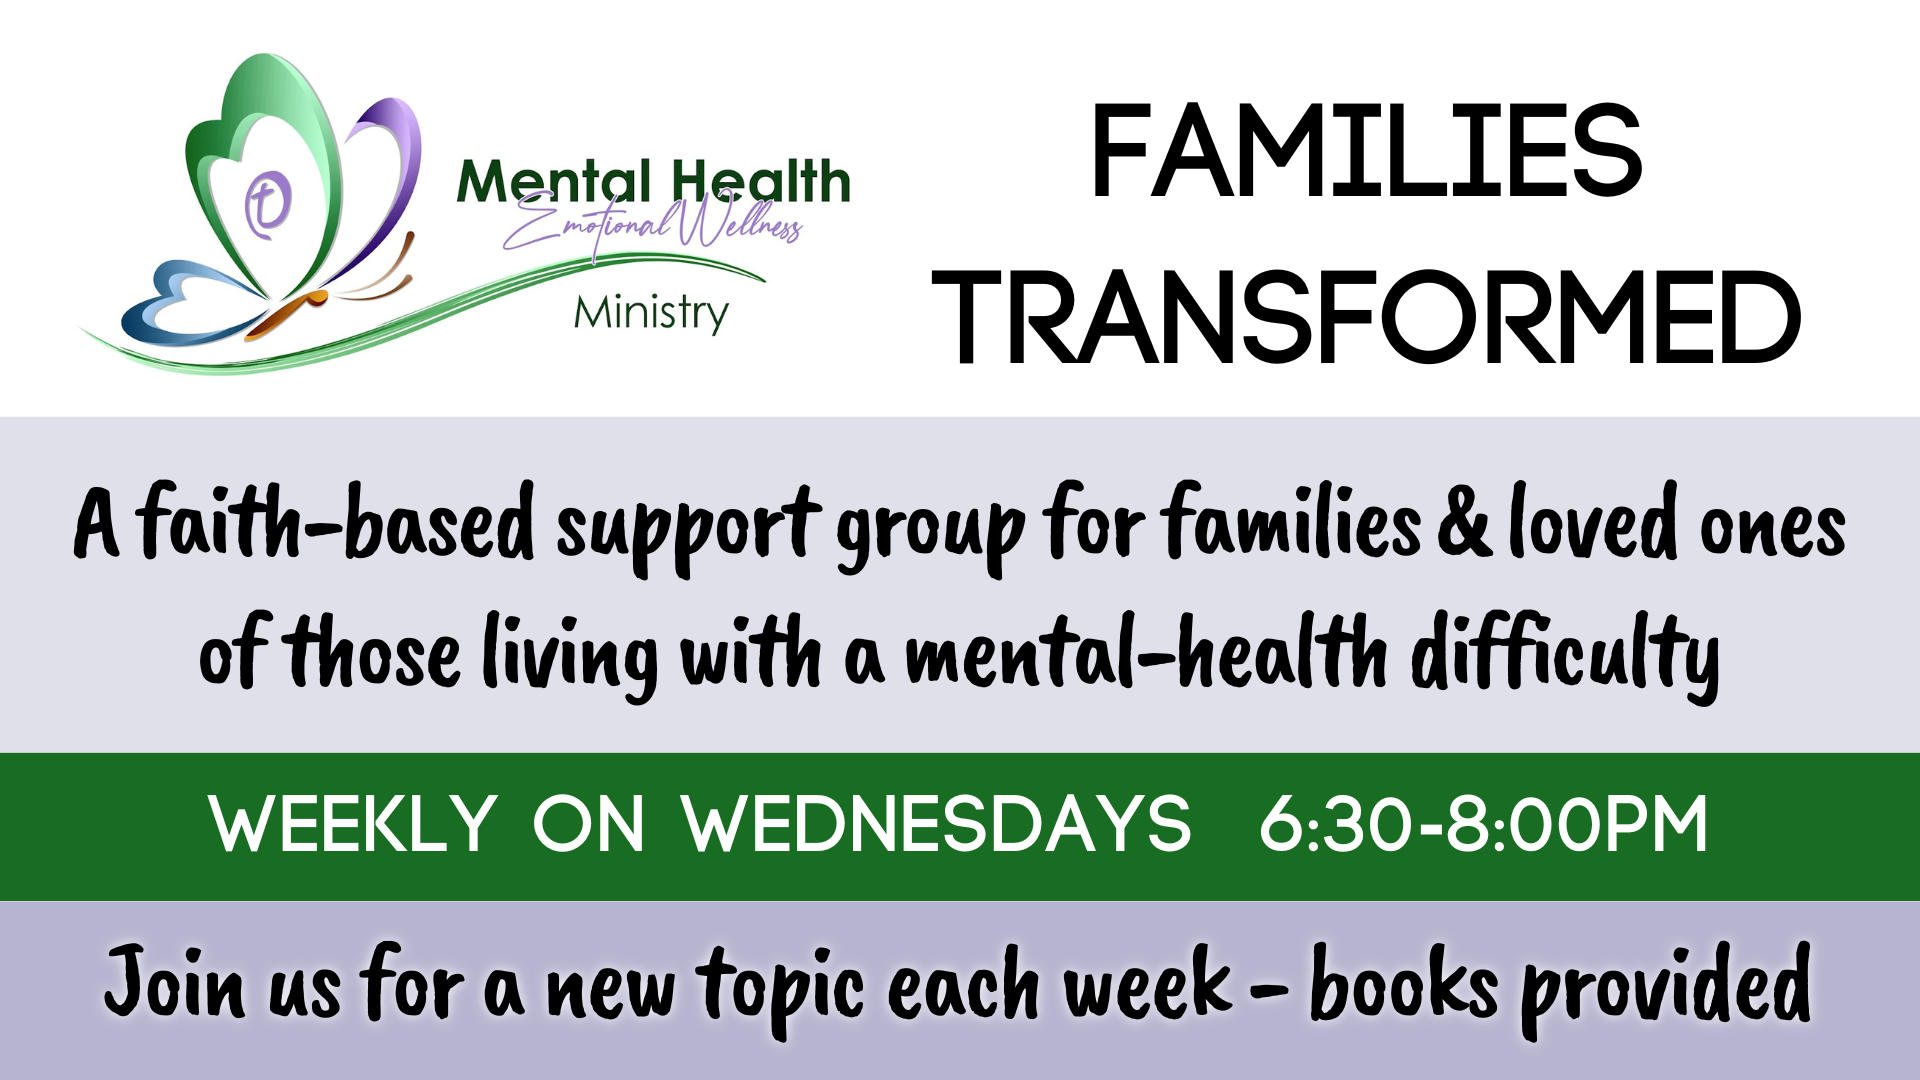 Families Transformed – updated